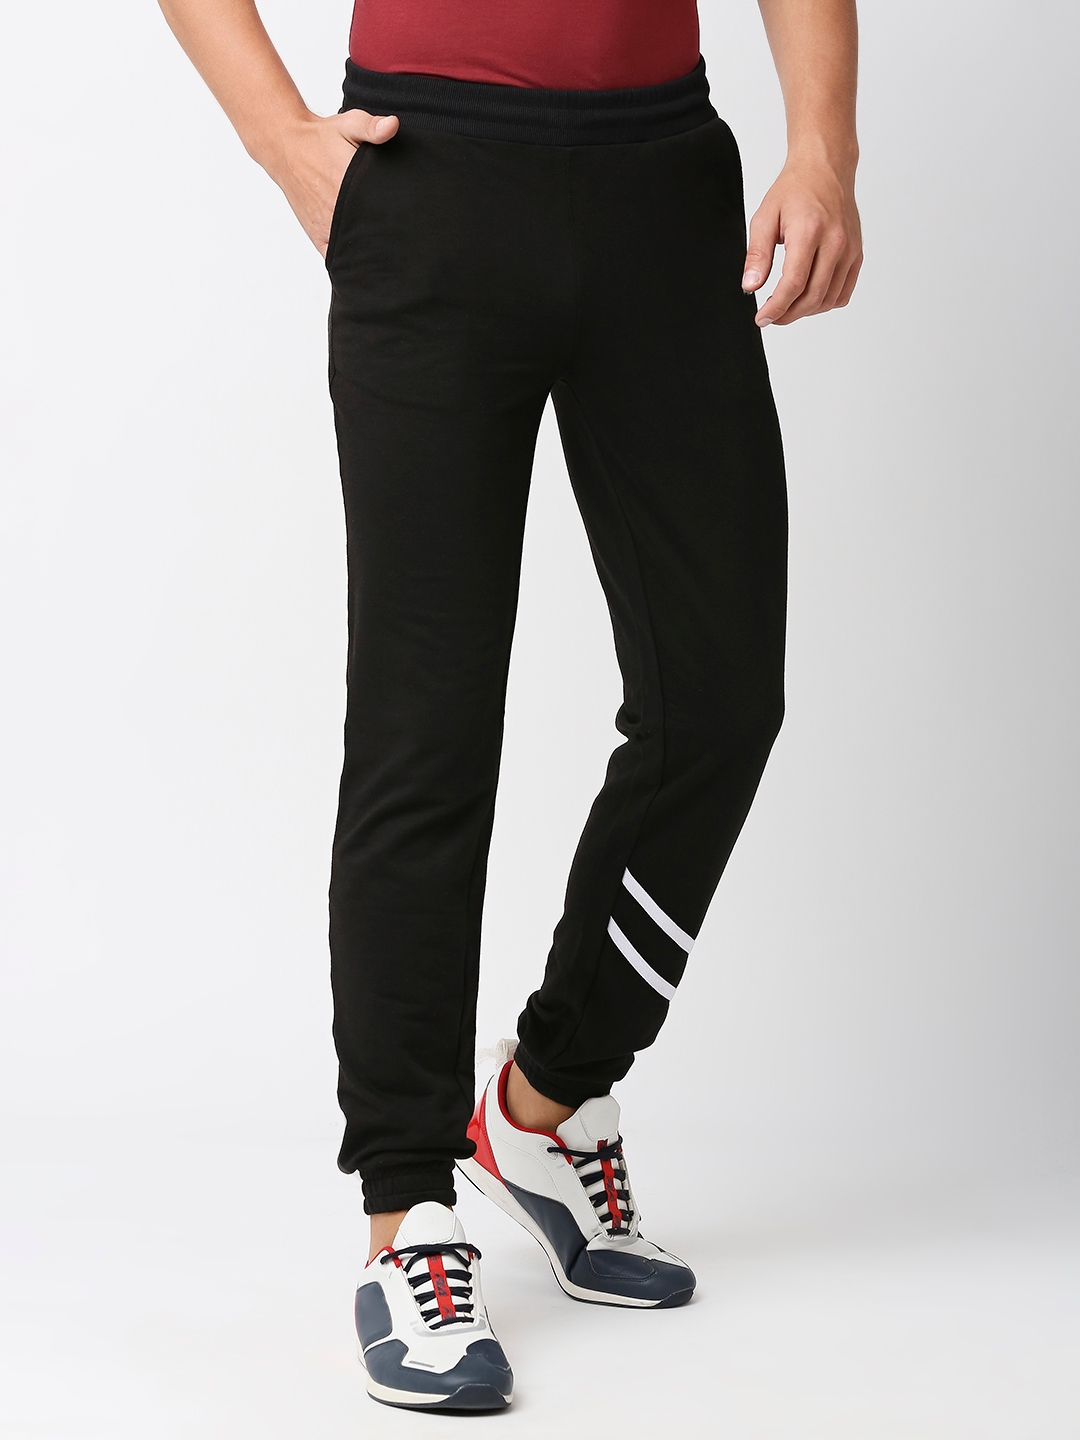 Fitz French Terry Solid Slim Fit Joggers Trackpants - Jet Black